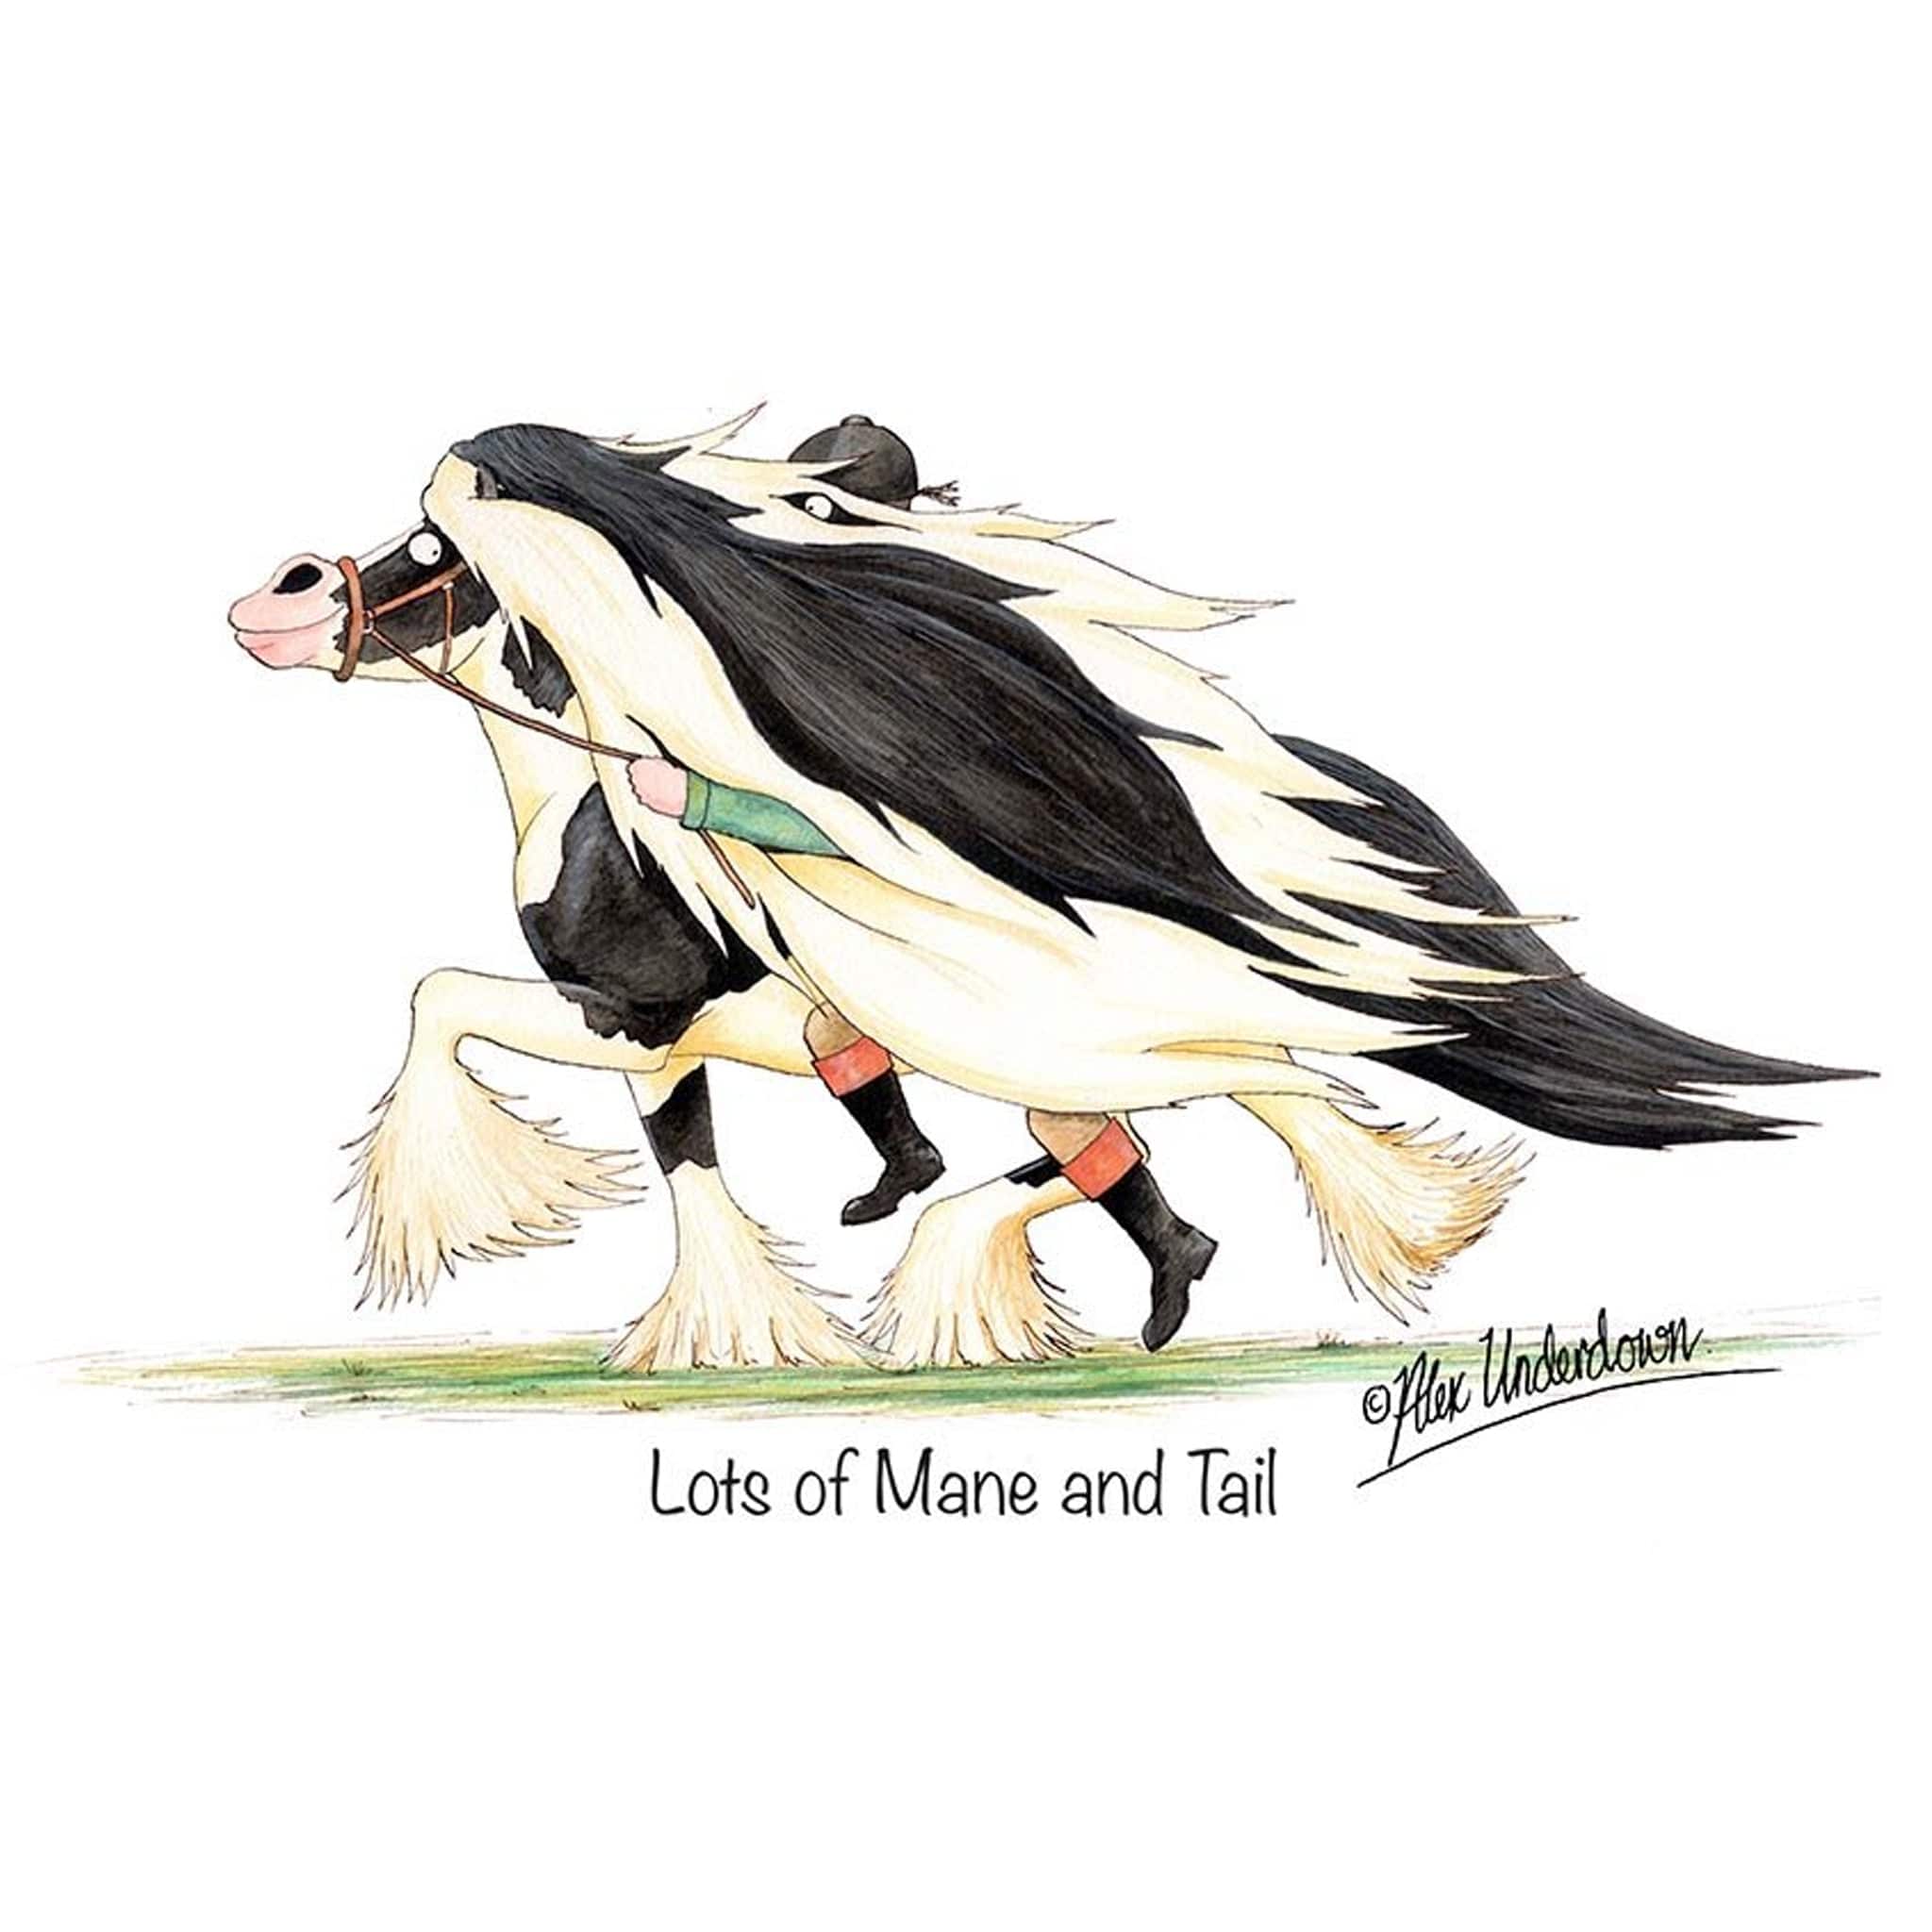 Lots of Mane and Tail Greeting Card ALUNMANEGC01